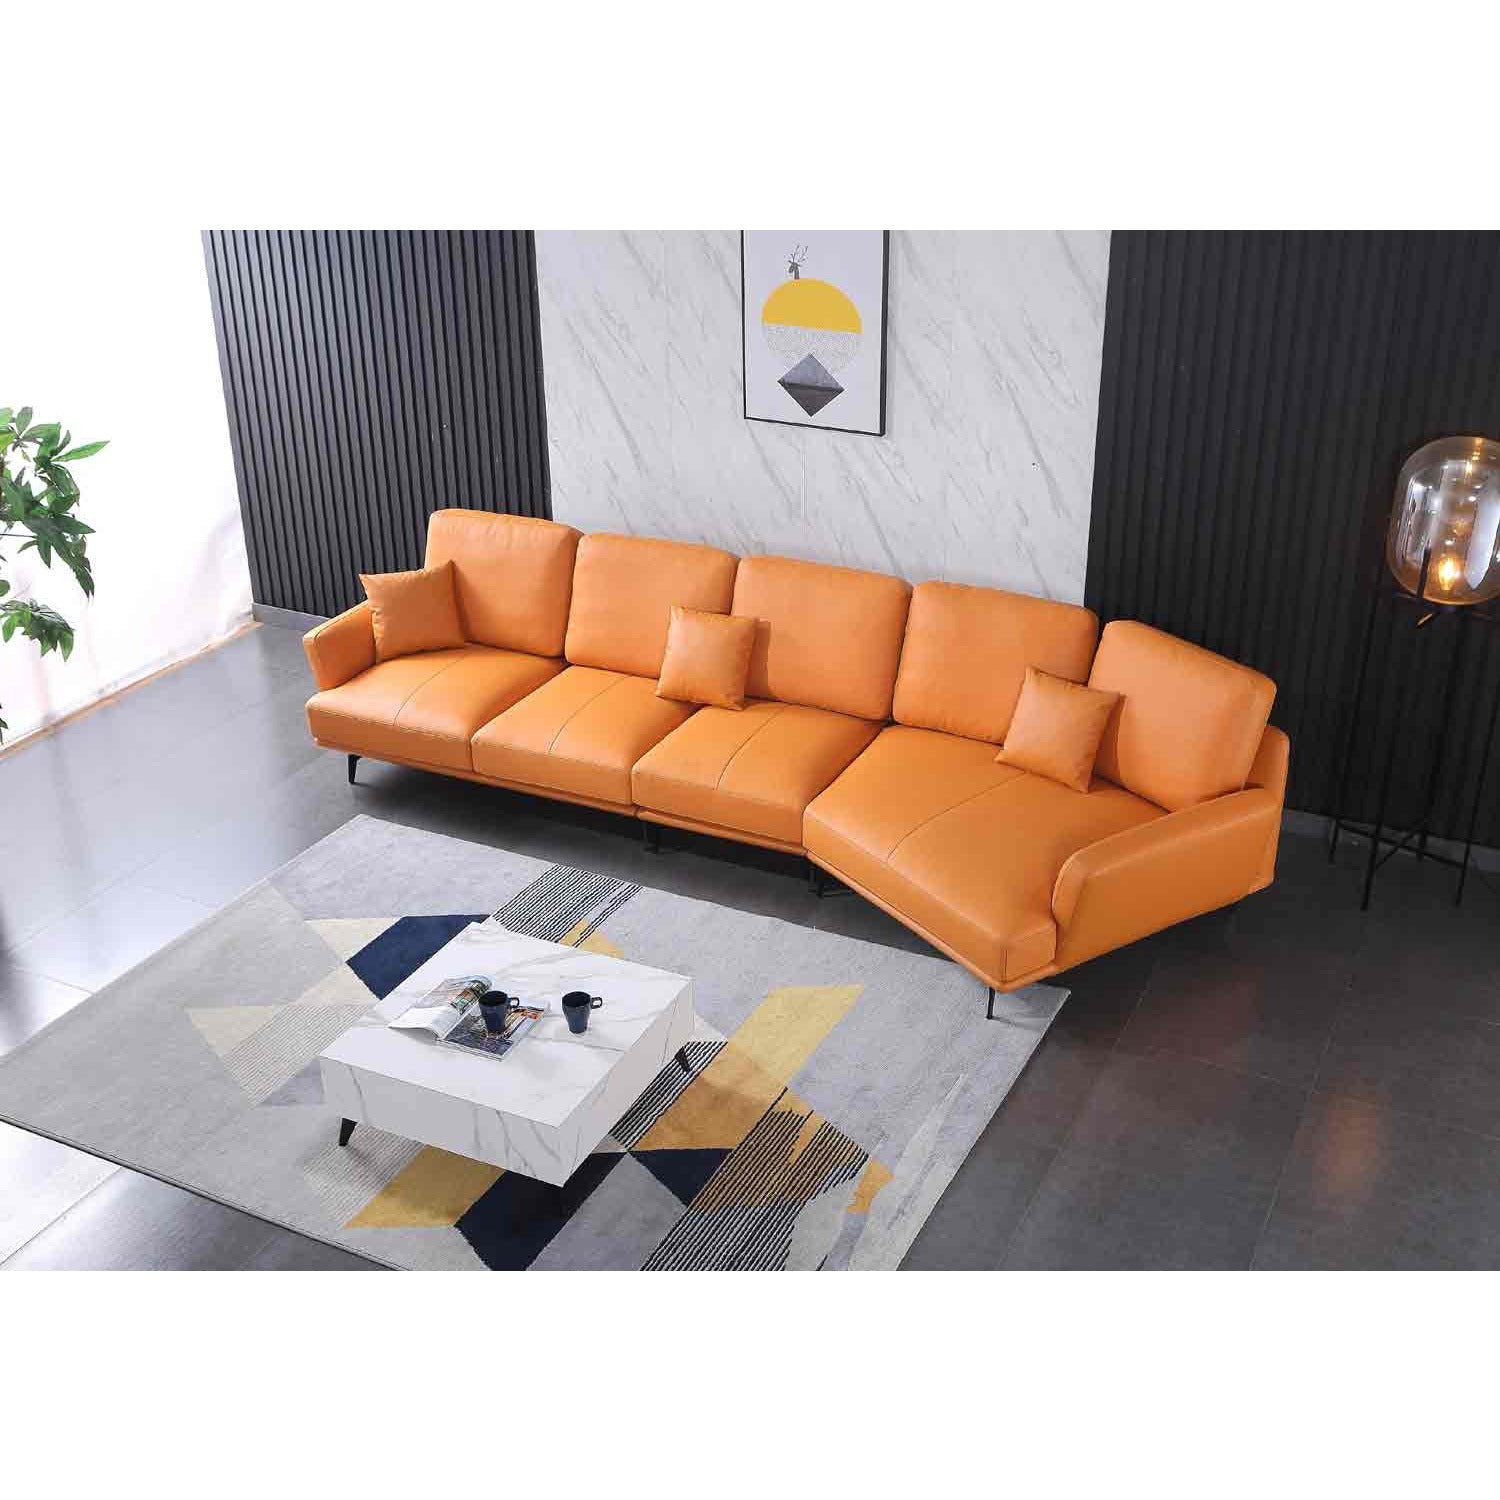 European Furniture - Galaxy Right Hand Chaise Sectional in Smokey Orange - 54430R-3RHC - New Star Living